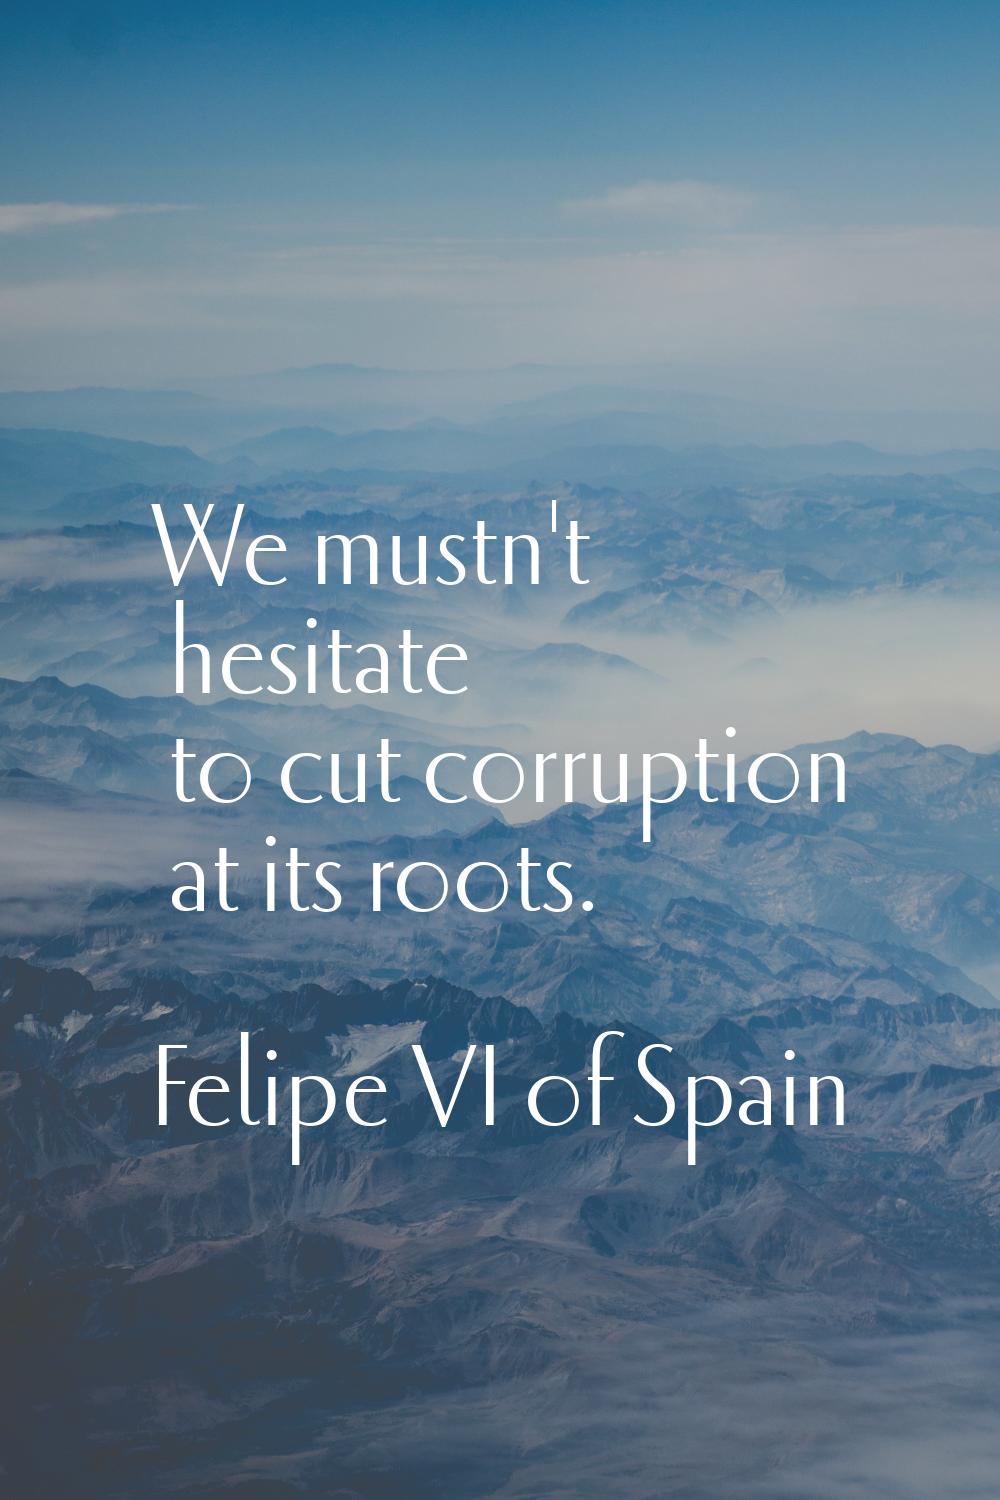 We mustn't hesitate to cut corruption at its roots.